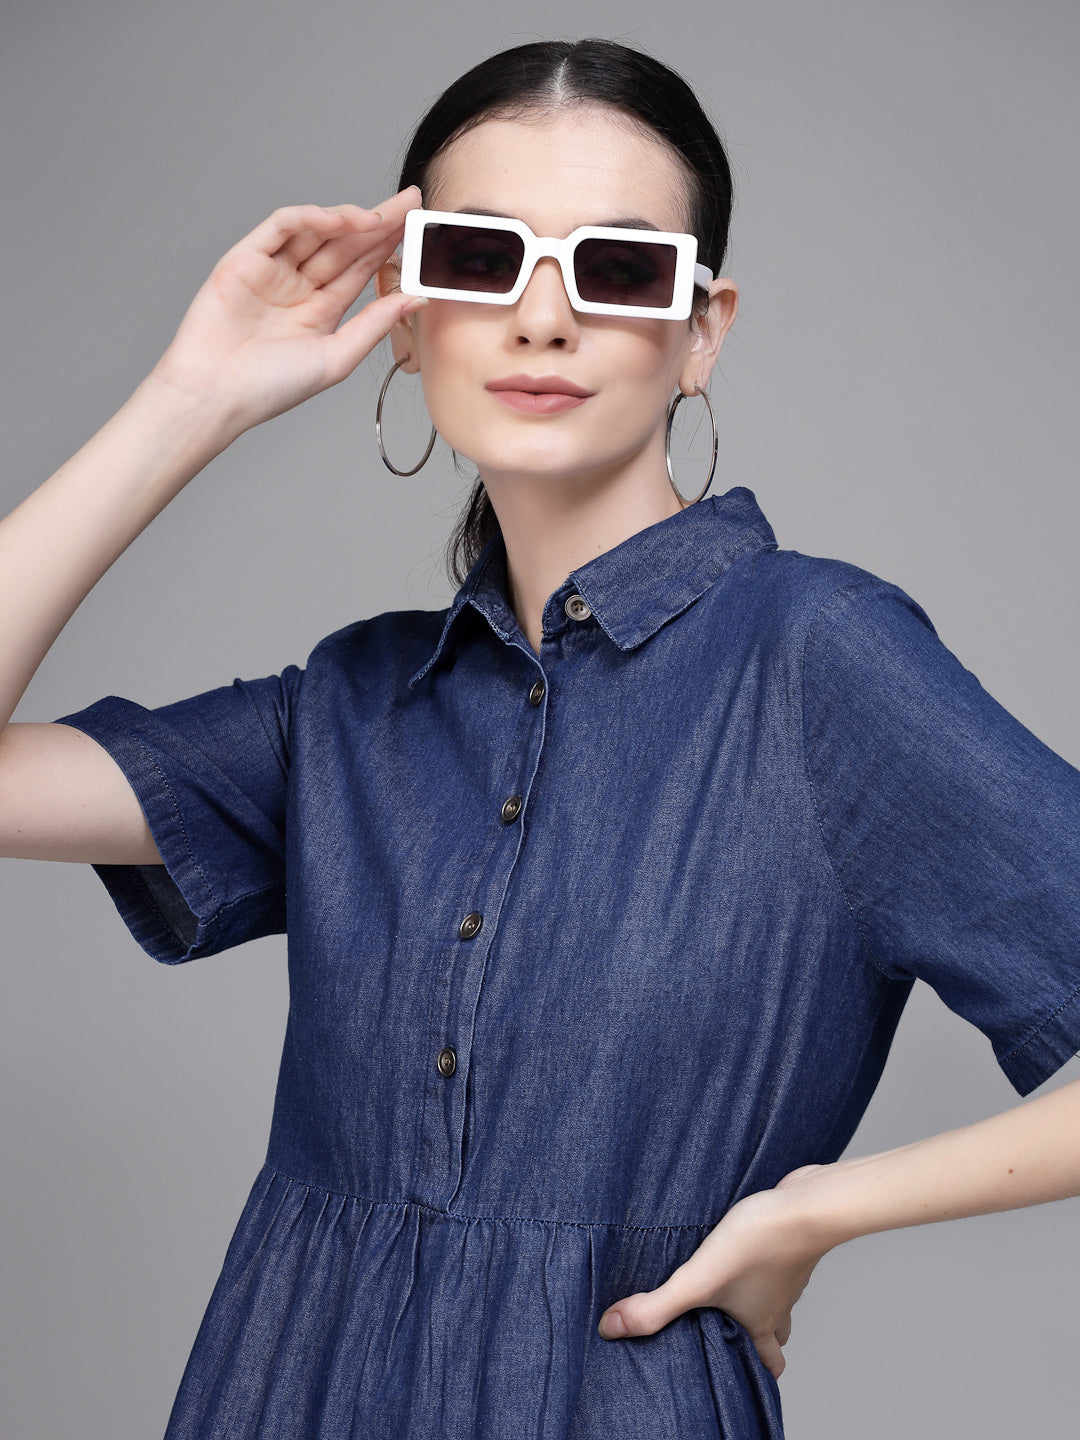 Levis Pure Cotton Solid Shirt Collar Denim Shirt Style Dress Price in  India, Full Specifications & Offers | DTashion.com